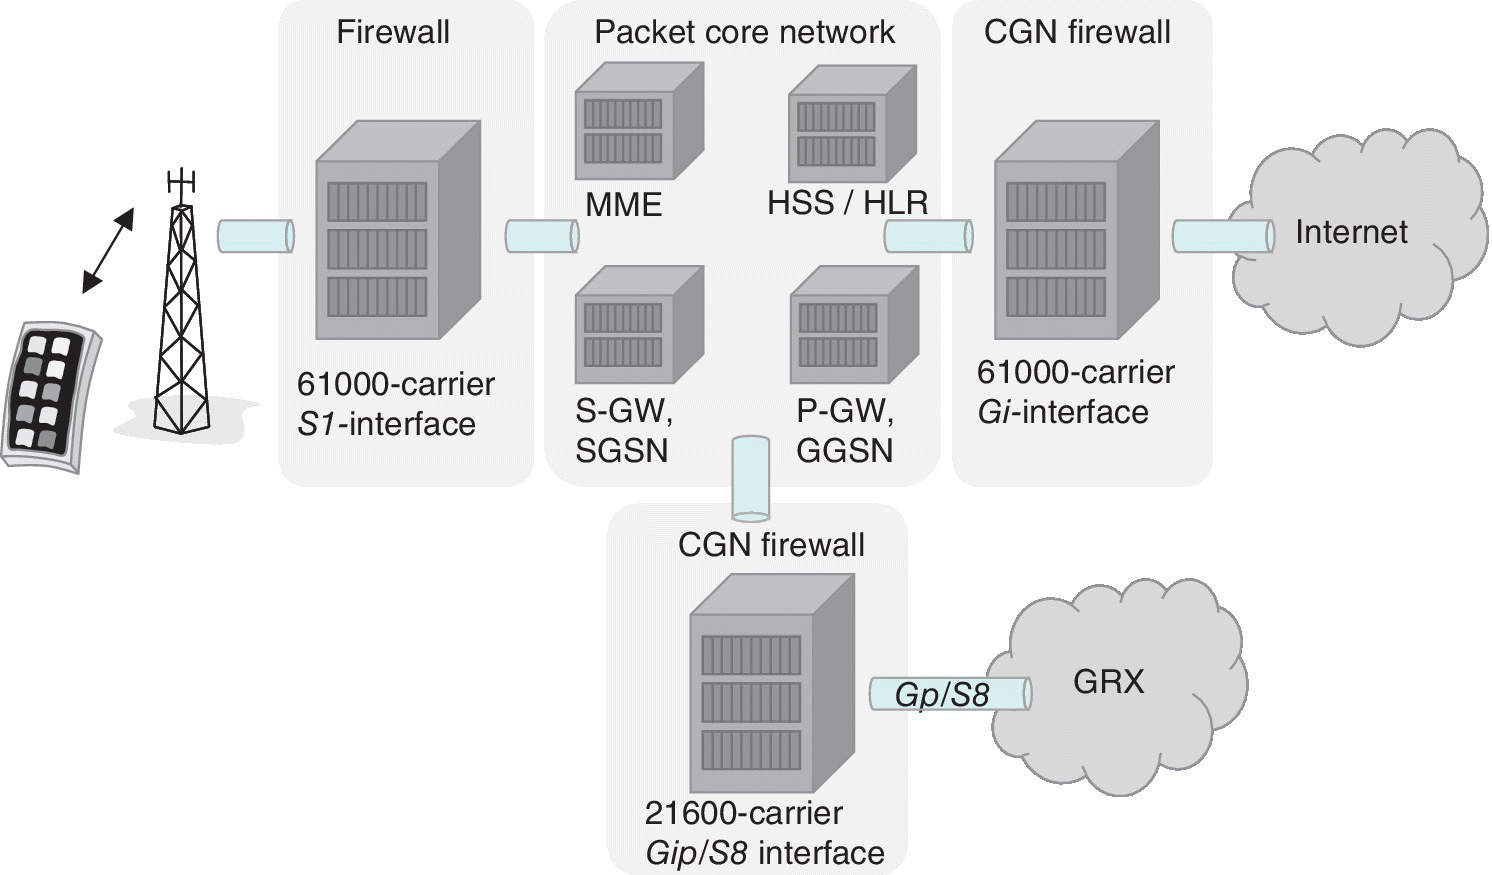 Network diagram illustrating an example of Check Point protecting roaming networks. It features the firewall, packet core network, CGN firewall connected to the Internet, and another CGN firewall connected to GRX.